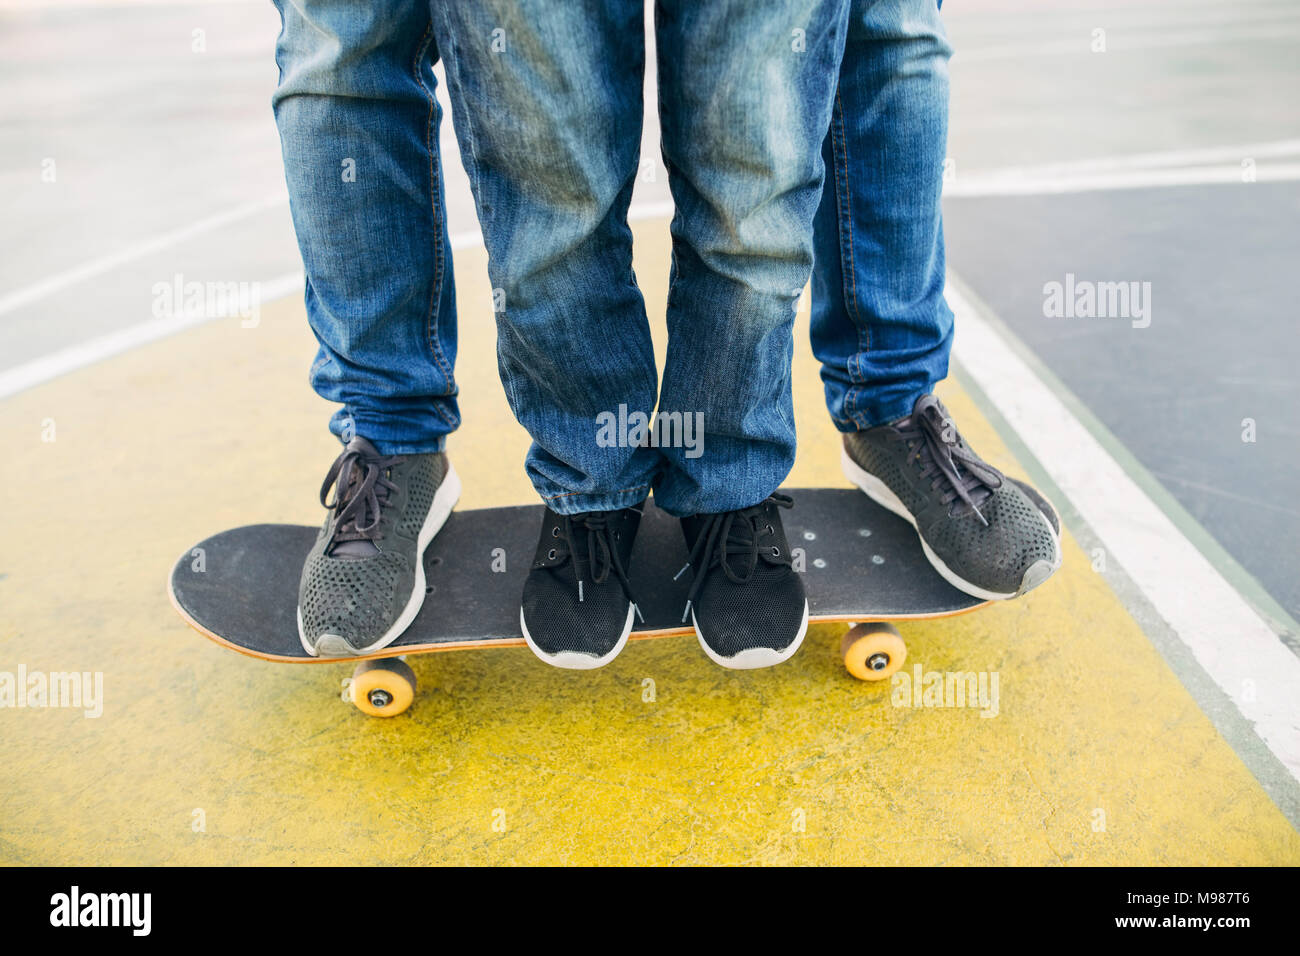 Legs of adult and child on skateboard Stock Photo